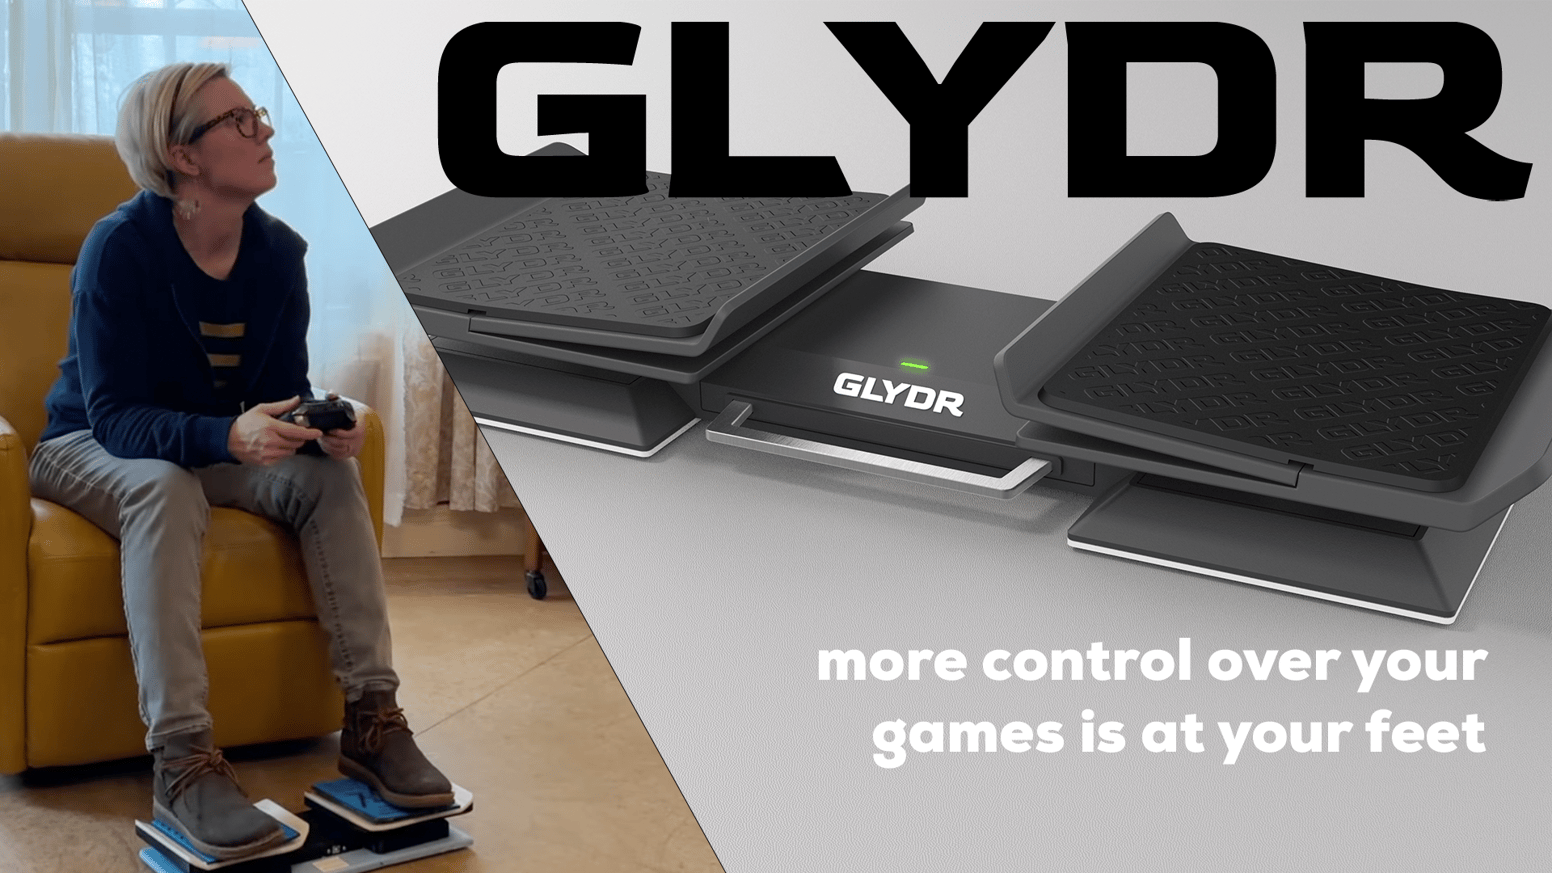 Promotional image of the GLYDR foot controller, showing a person playing games while resting their feet on the controller.